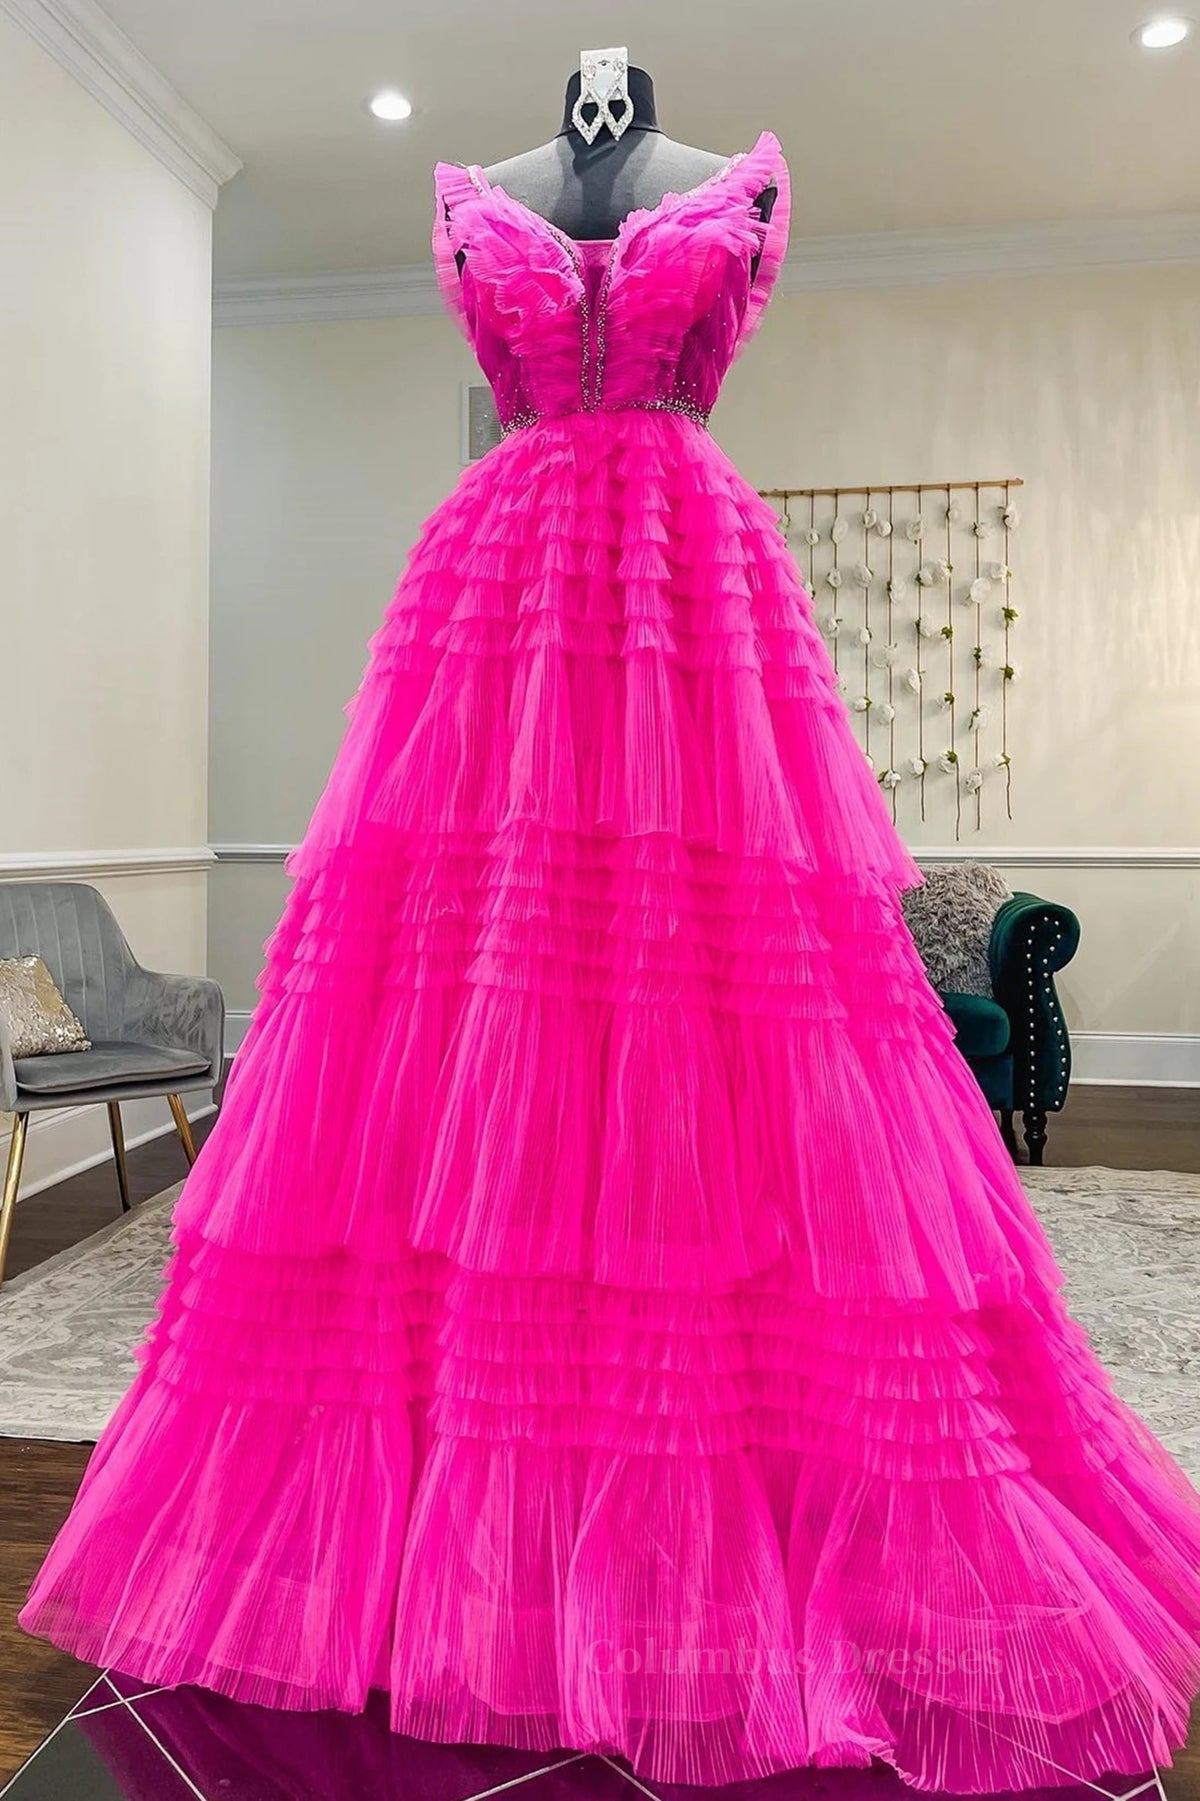 Prom Dresses Floral, Hot Pink Tulle Long Prom Dresses, Hot Pink Long Formal Graduation Dresses